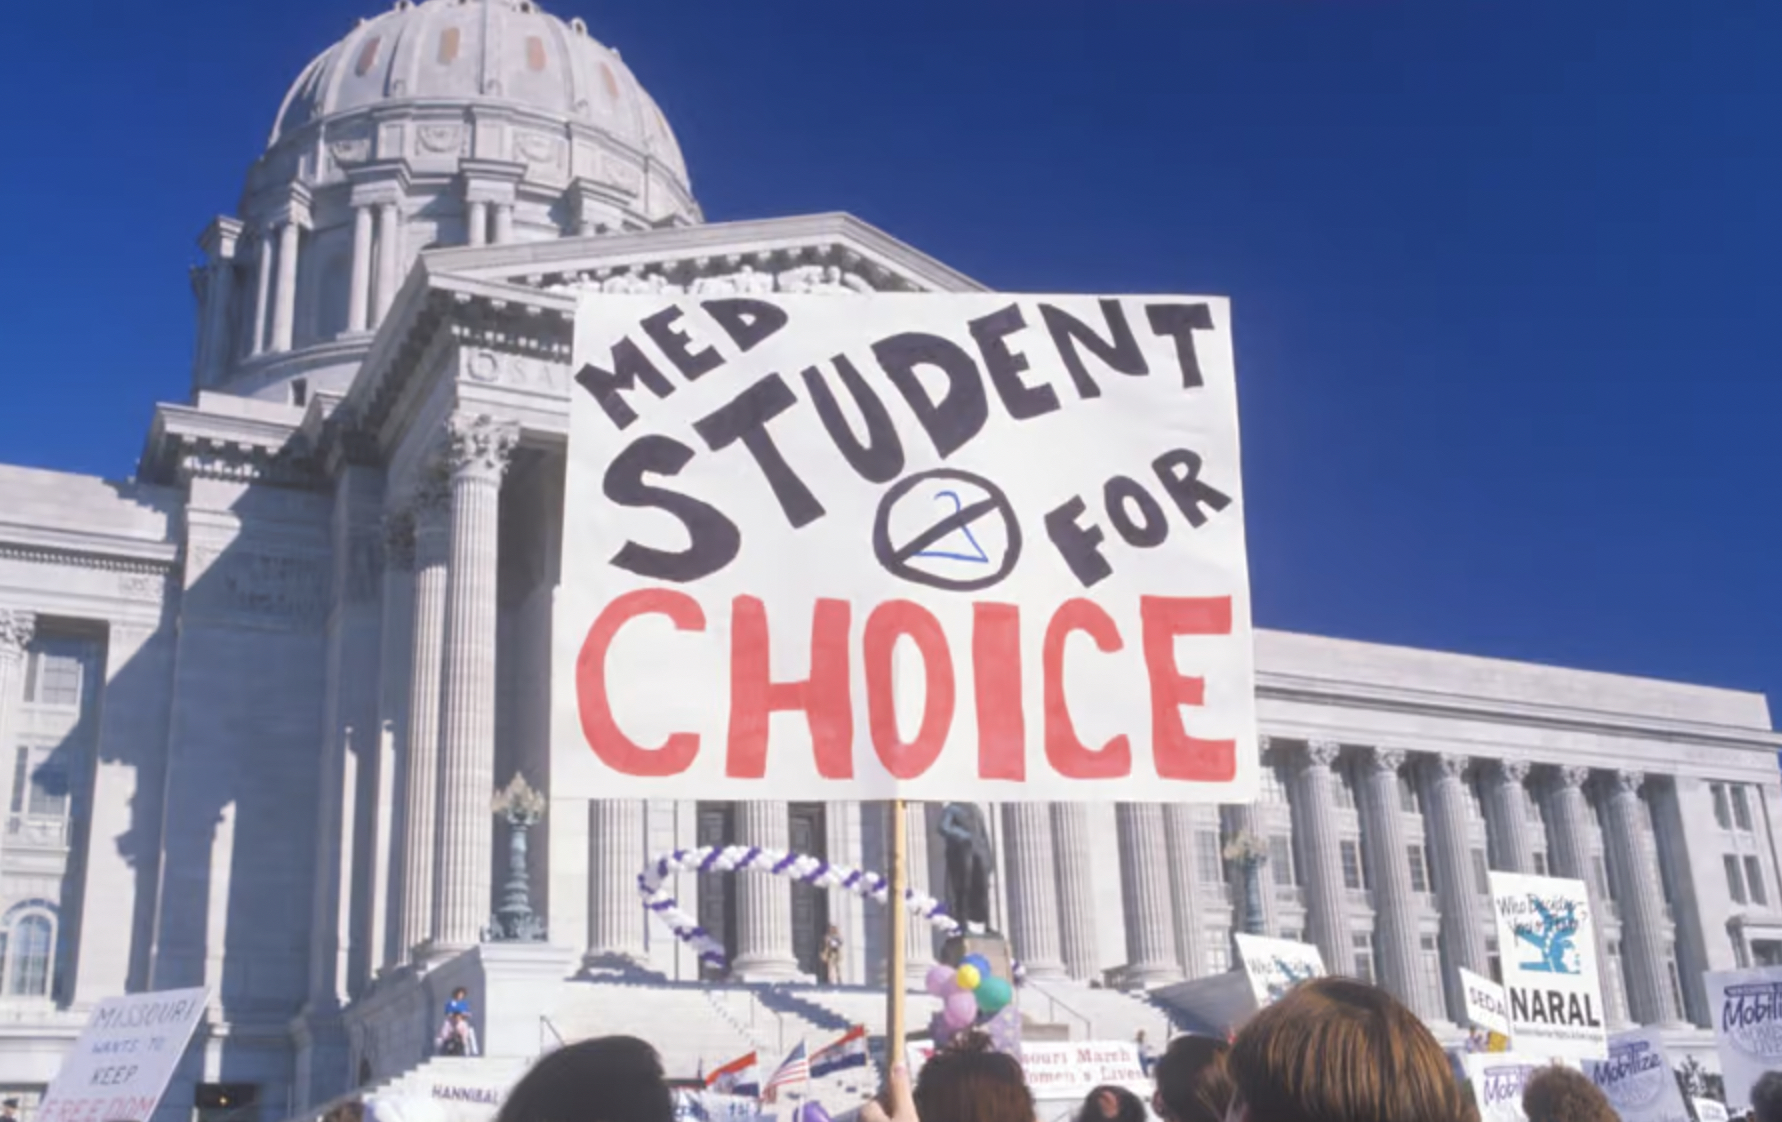 Without Abortion Rights, Medical Students Face a Dangerous Choice